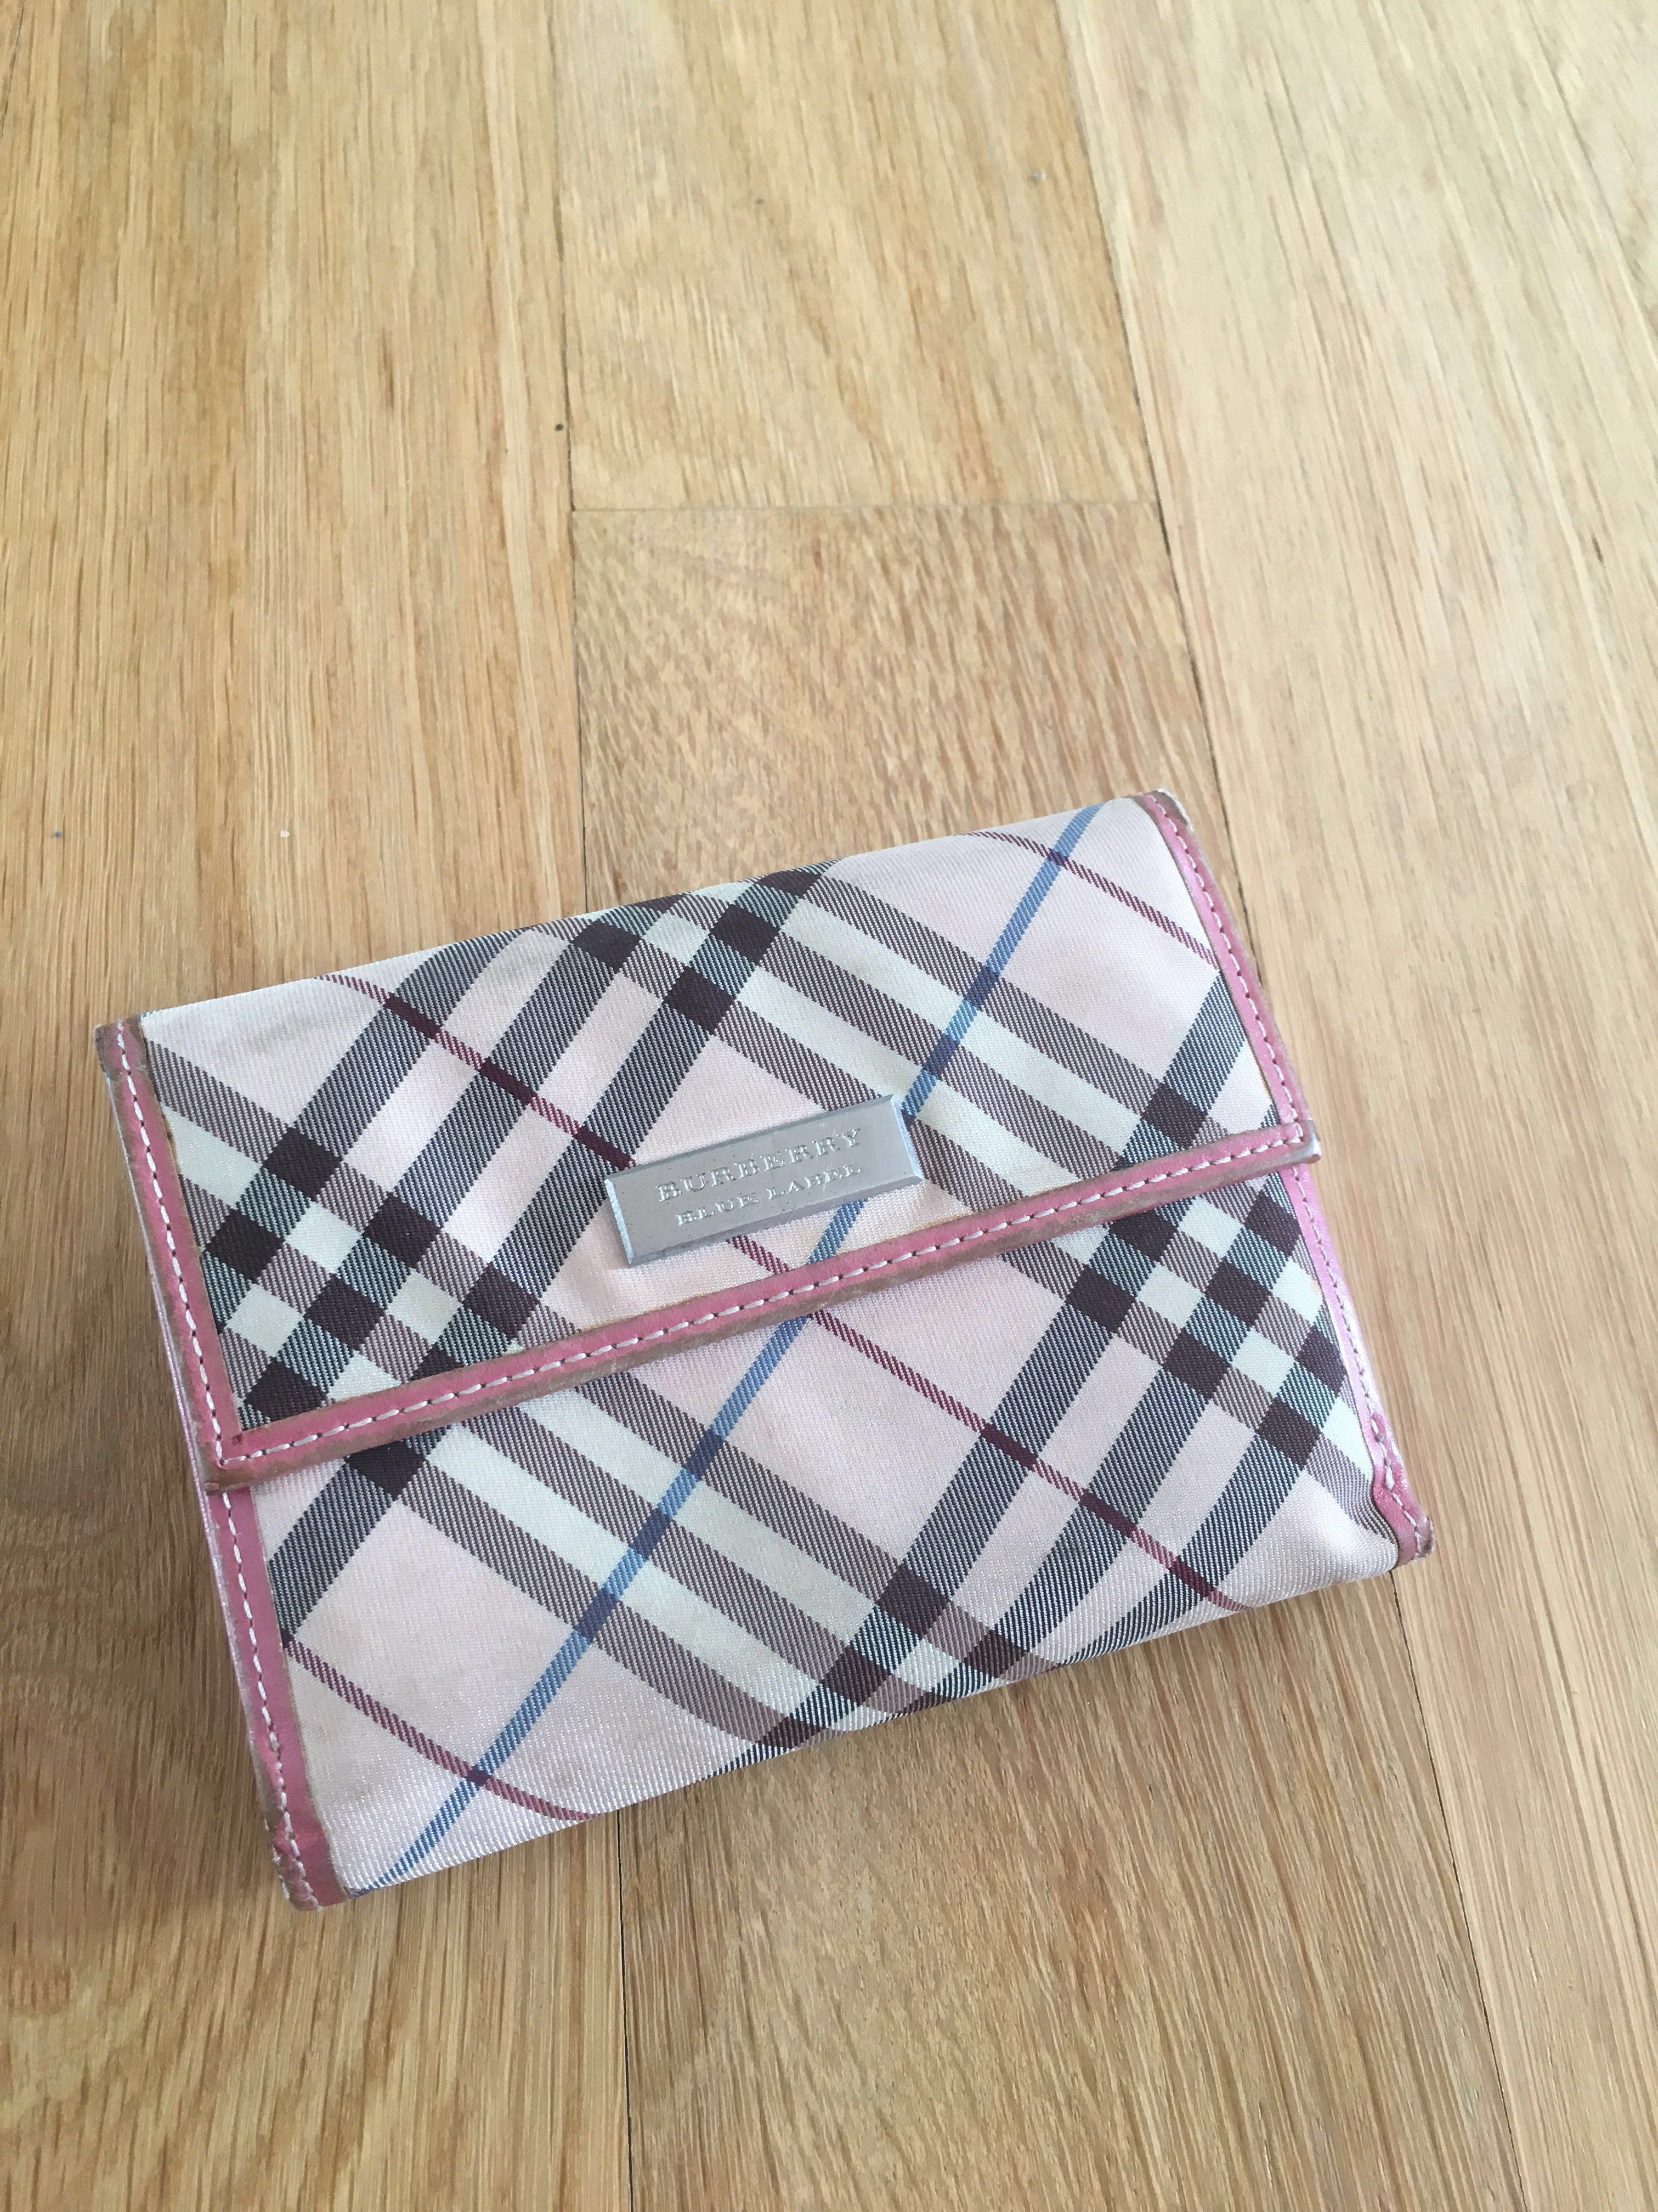 Burberry Blue Label limited edition pink wallet purse, Women's Fashion, Bags  \u0026 Wallets, Wallets \u0026 Card Holders on Carousell